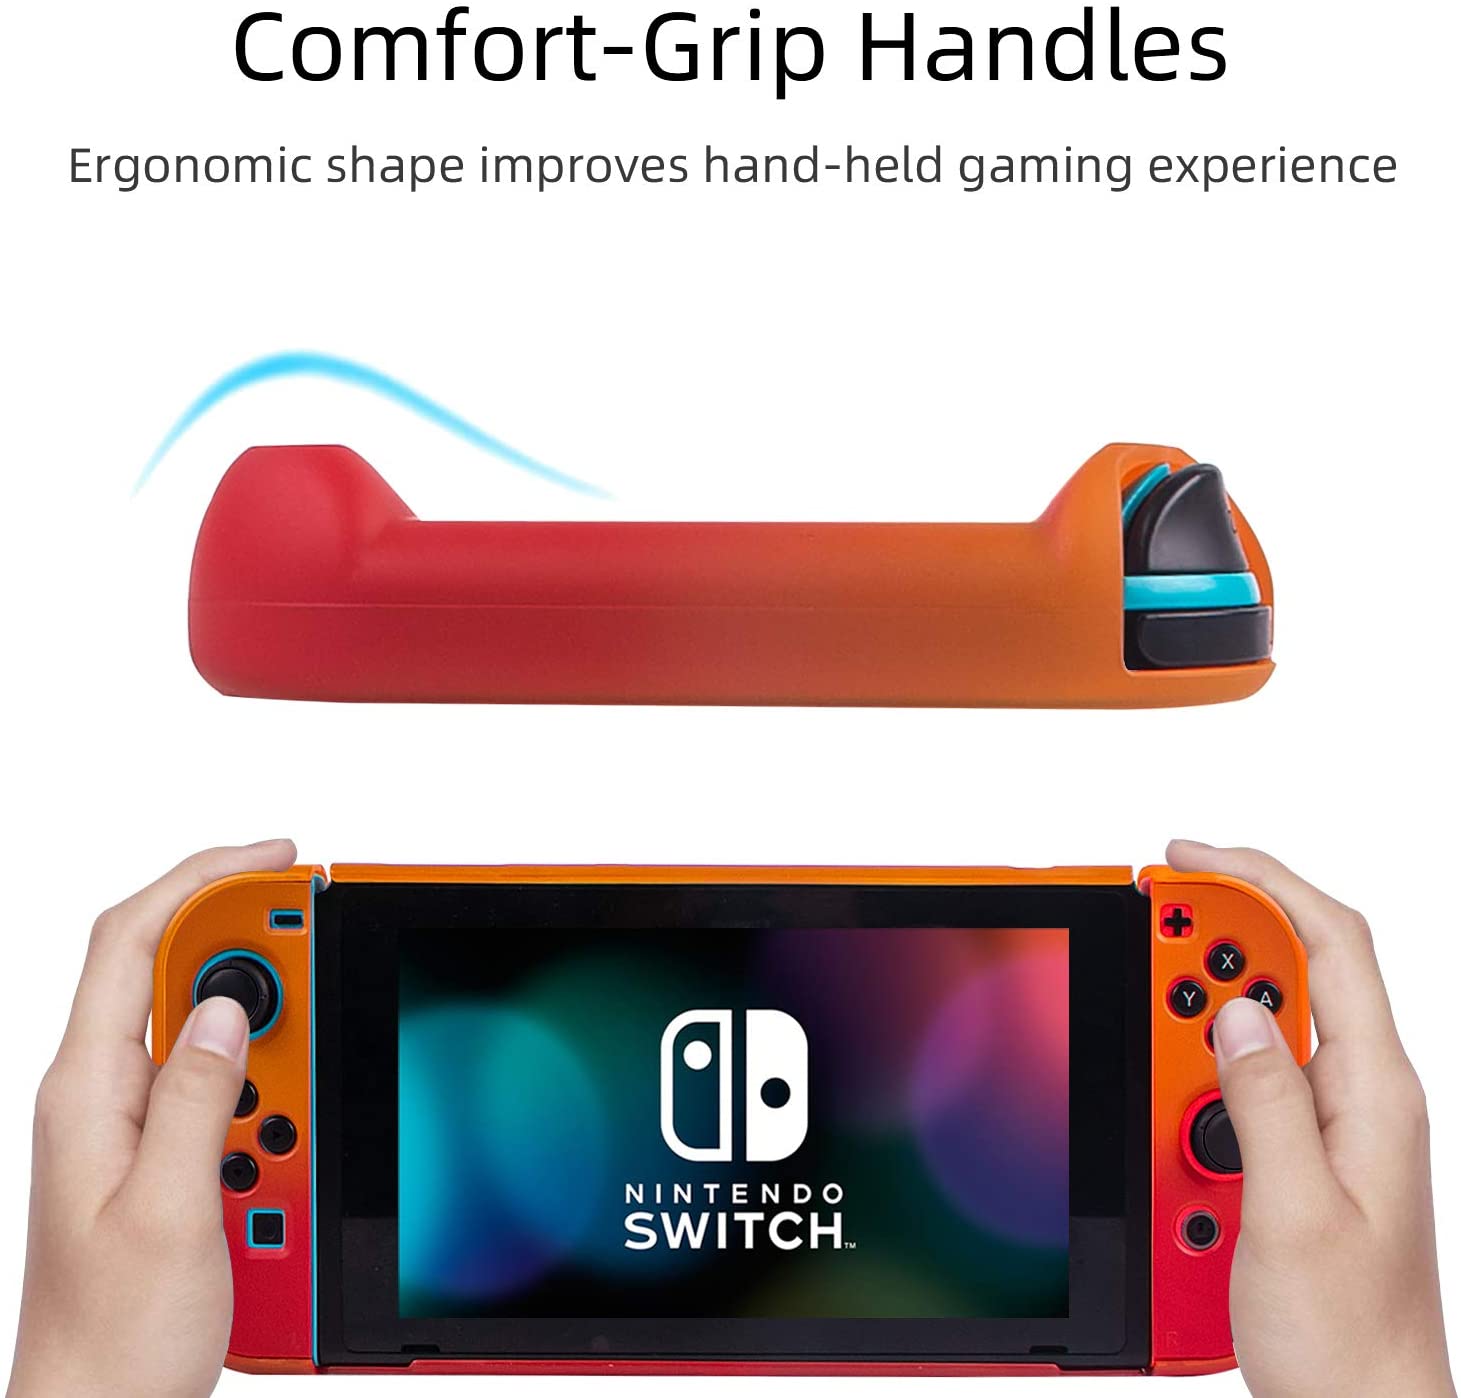 Protective Case Cover for Nintendo Switch, Hard Shell Case Handheld Grip for Nintendo Switch Console and Joy-Con Controllers with 2 Thumbsticks (Orange)